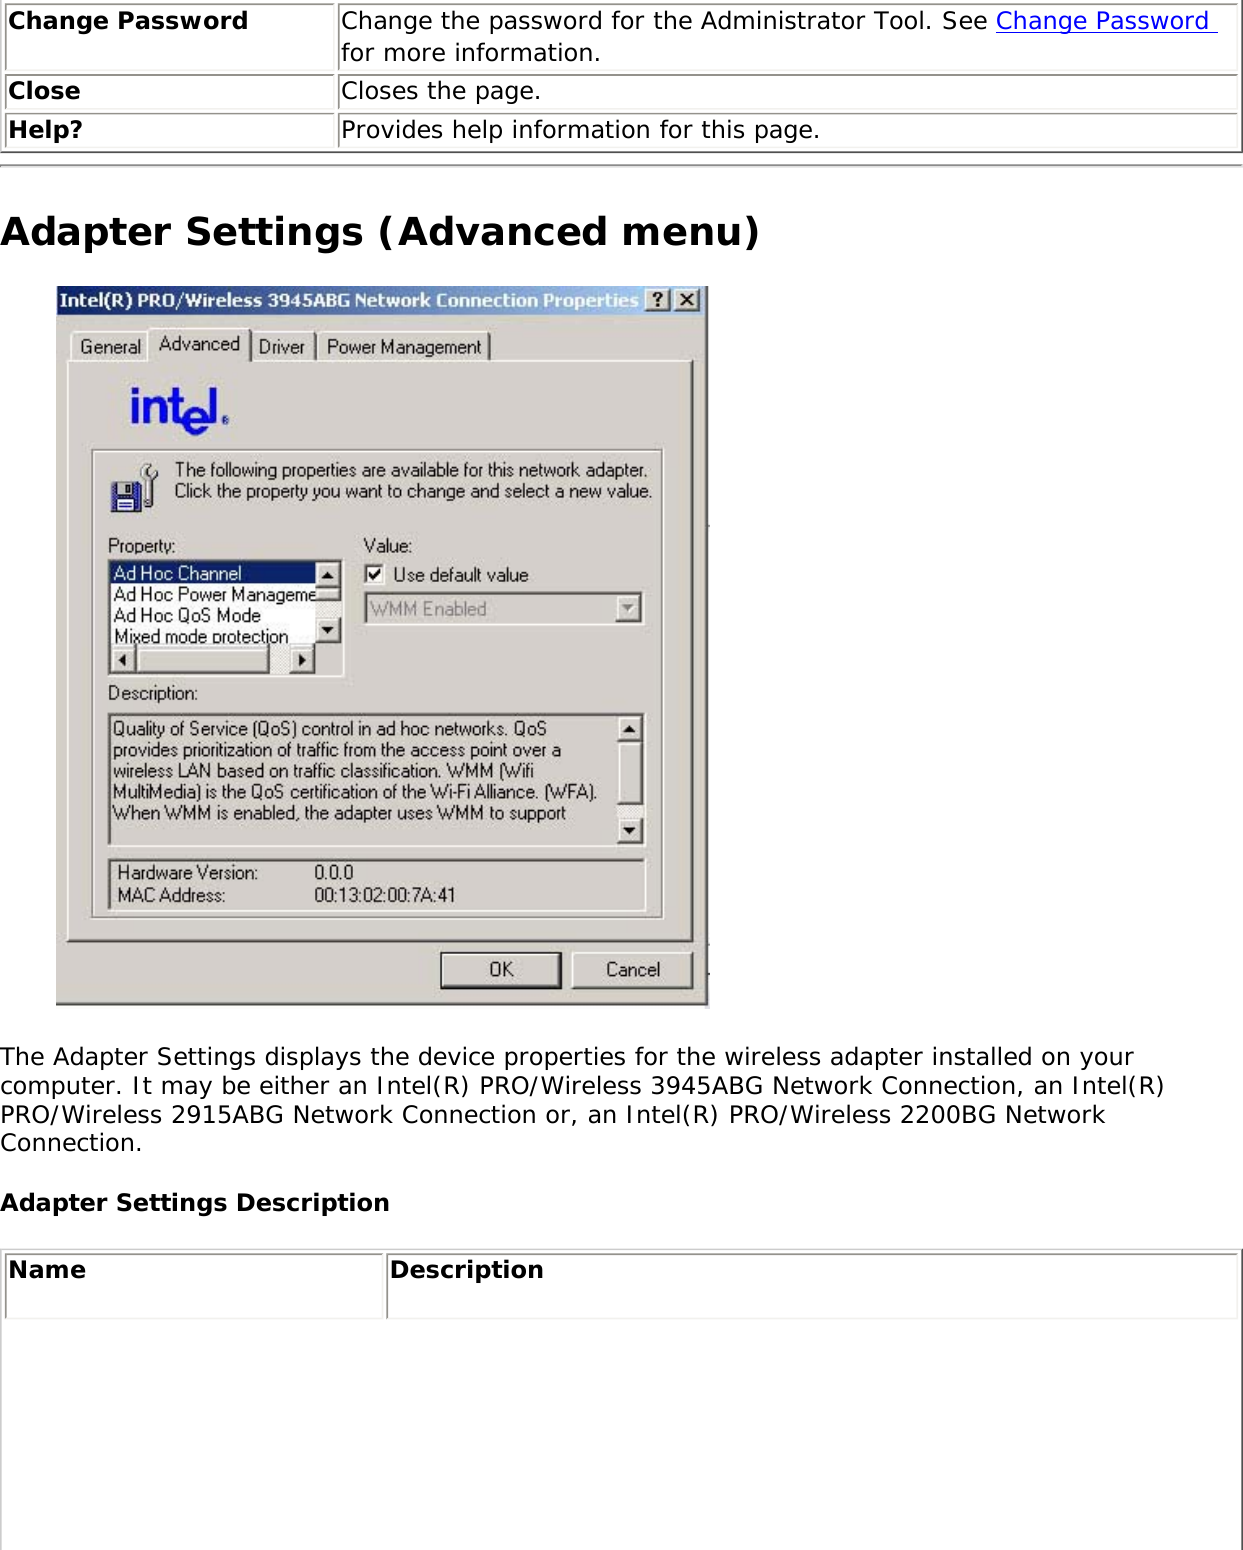 Change Password  Change the password for the Administrator Tool. See Change Password for more information.Close  Closes the page.Help? Provides help information for this page.Adapter Settings (Advanced menu) The Adapter Settings displays the device properties for the wireless adapter installed on your computer. It may be either an Intel(R) PRO/Wireless 3945ABG Network Connection, an Intel(R) PRO/Wireless 2915ABG Network Connection or, an Intel(R) PRO/Wireless 2200BG Network Connection. Adapter Settings Description Name Description